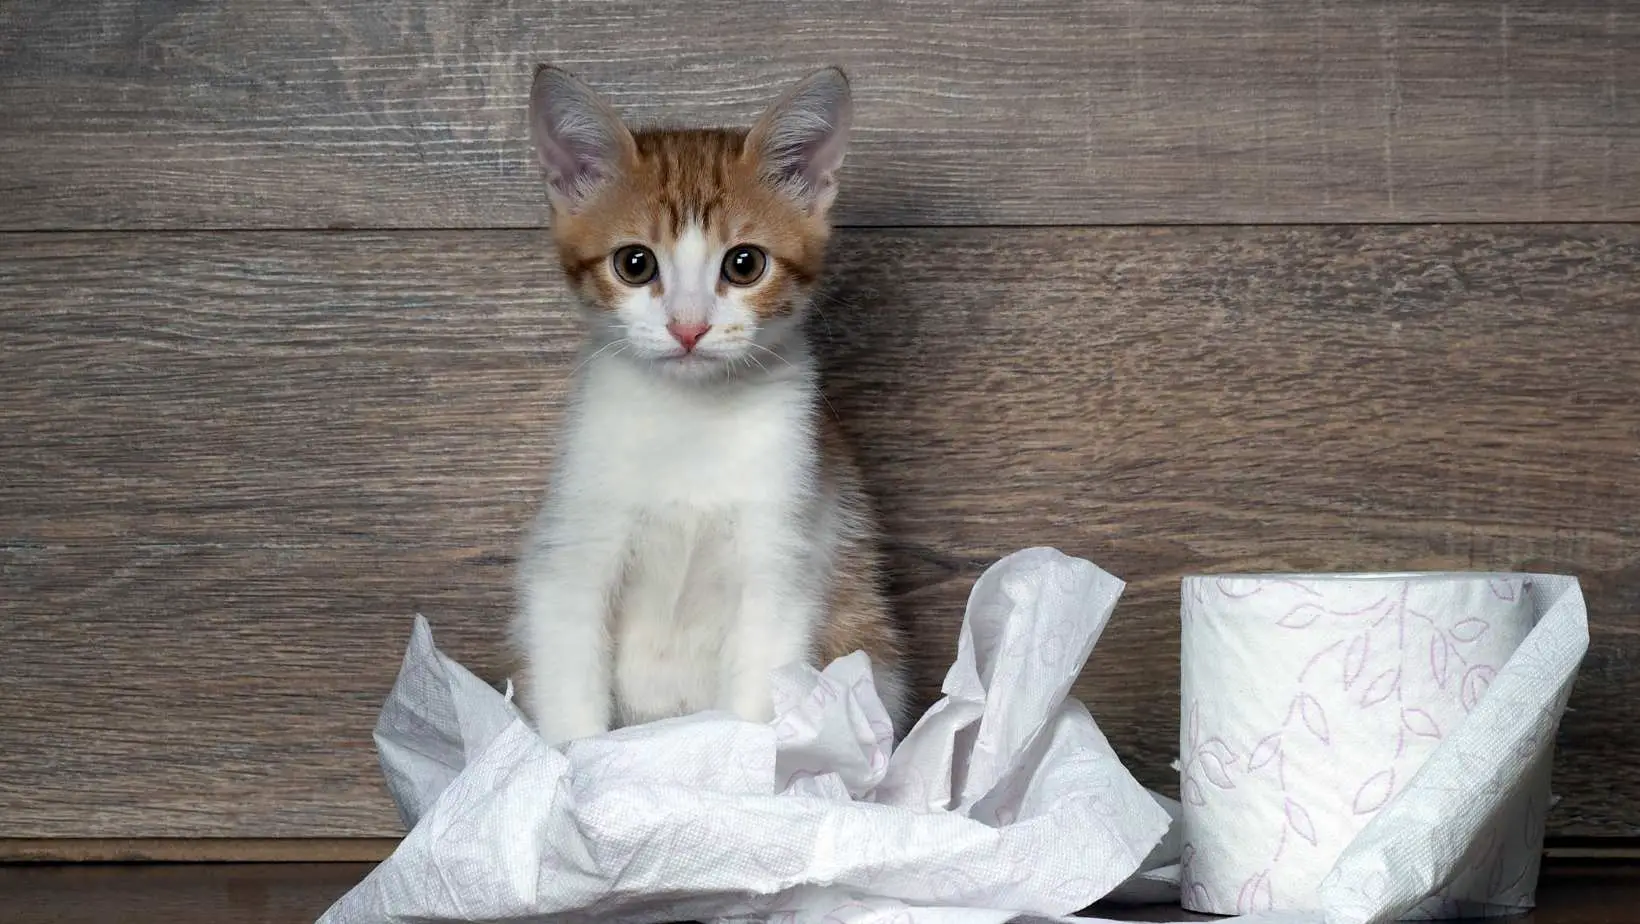 Why Do Cats Like to Sit on Paper?